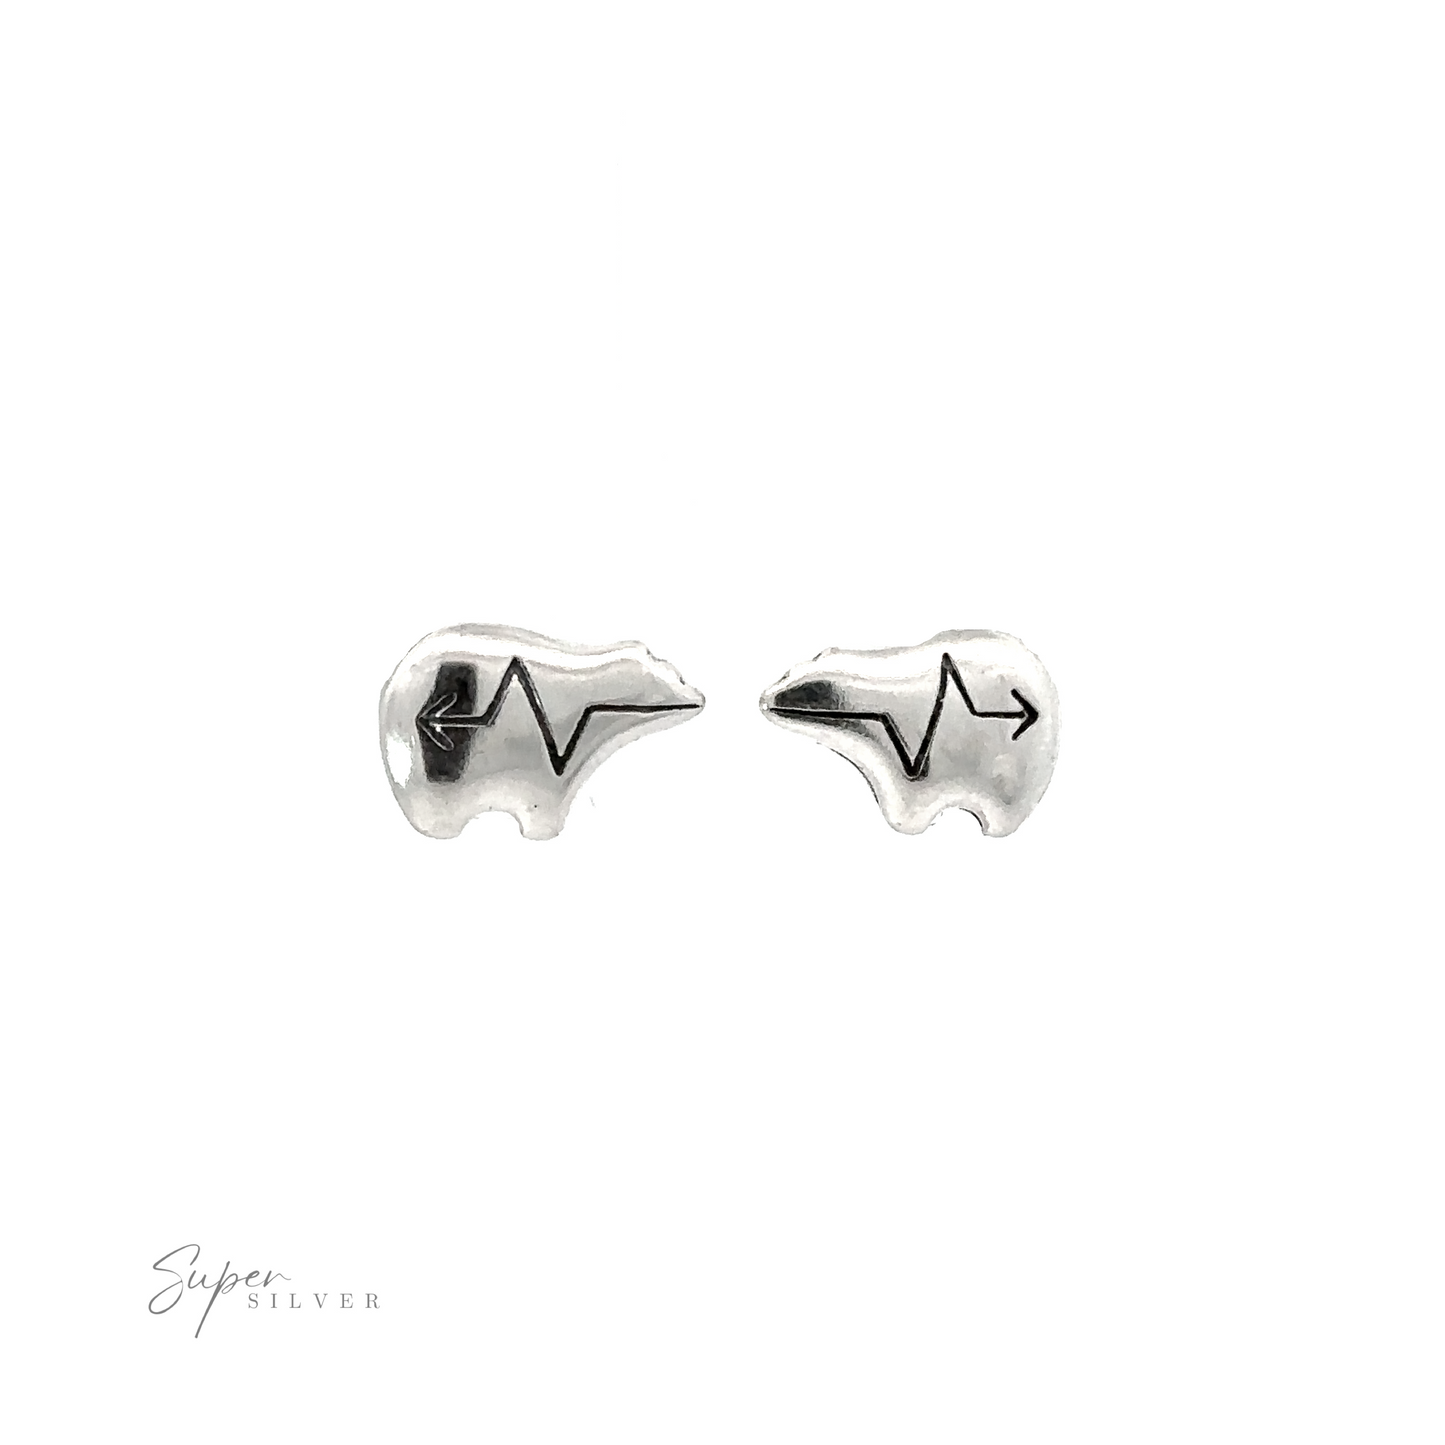 A pair of Native Bear Studs made with .925 Sterling Silver, featuring a native symbol, on a white background.